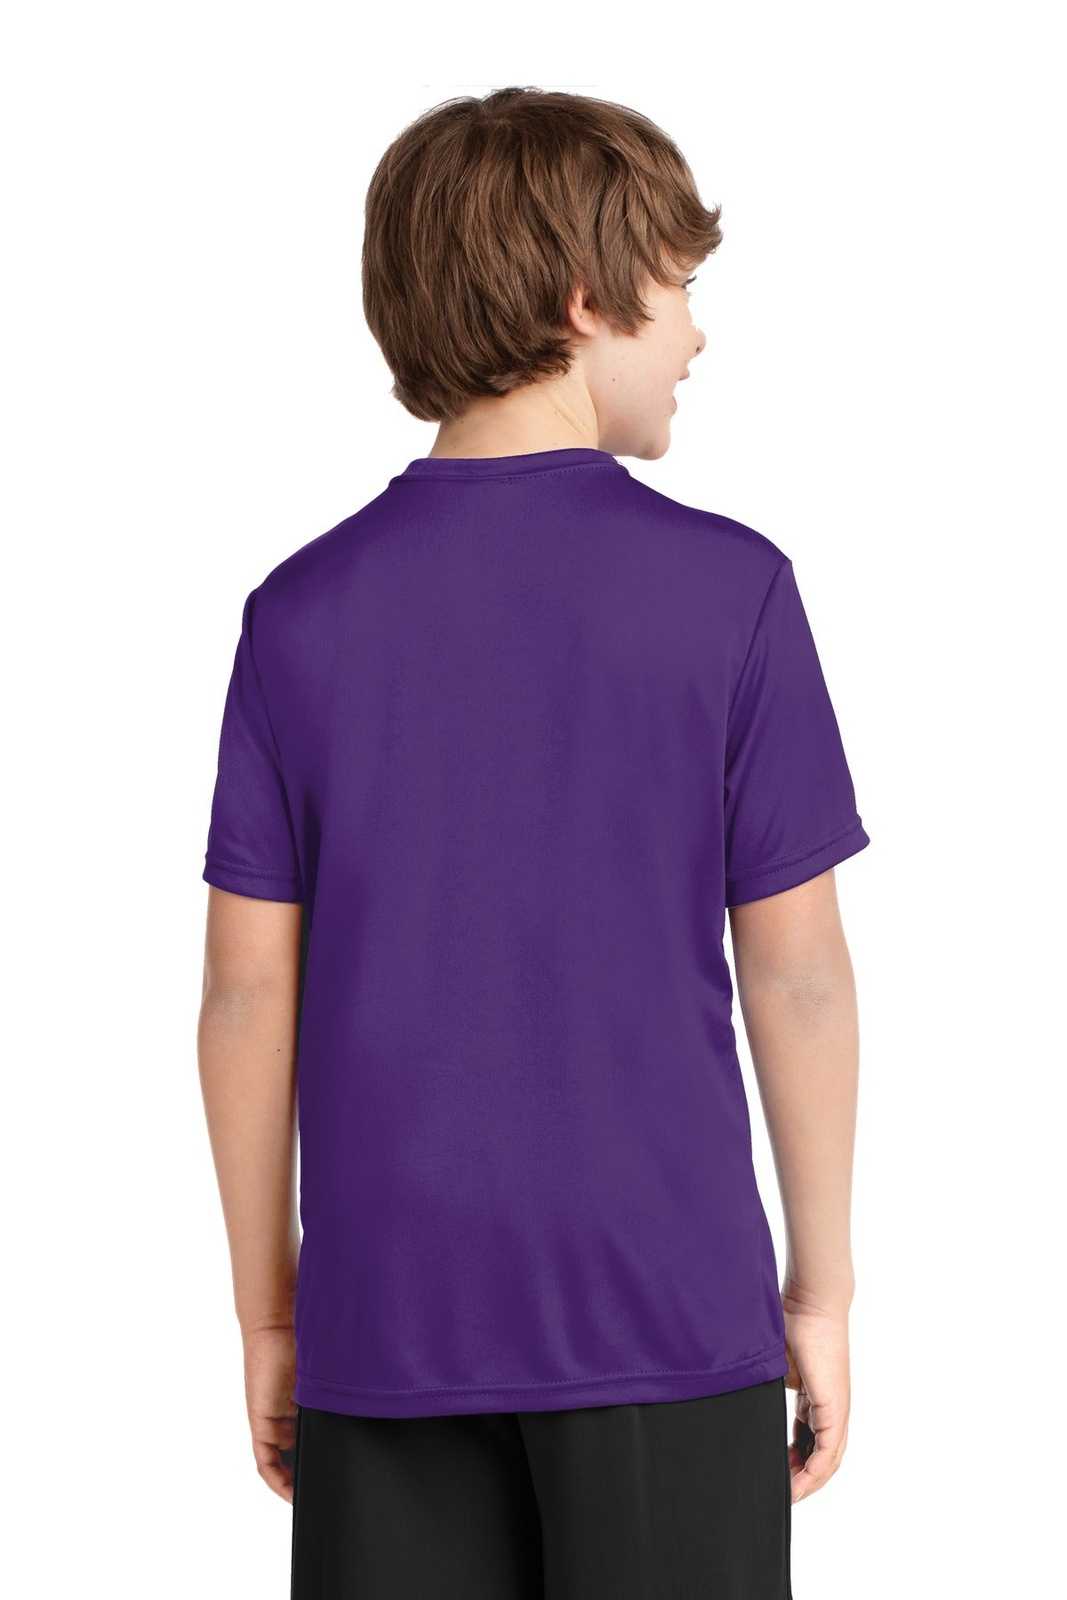 Port & Company PC380Y Youth Performance Tee - Team Purple - HIT a Double - 1